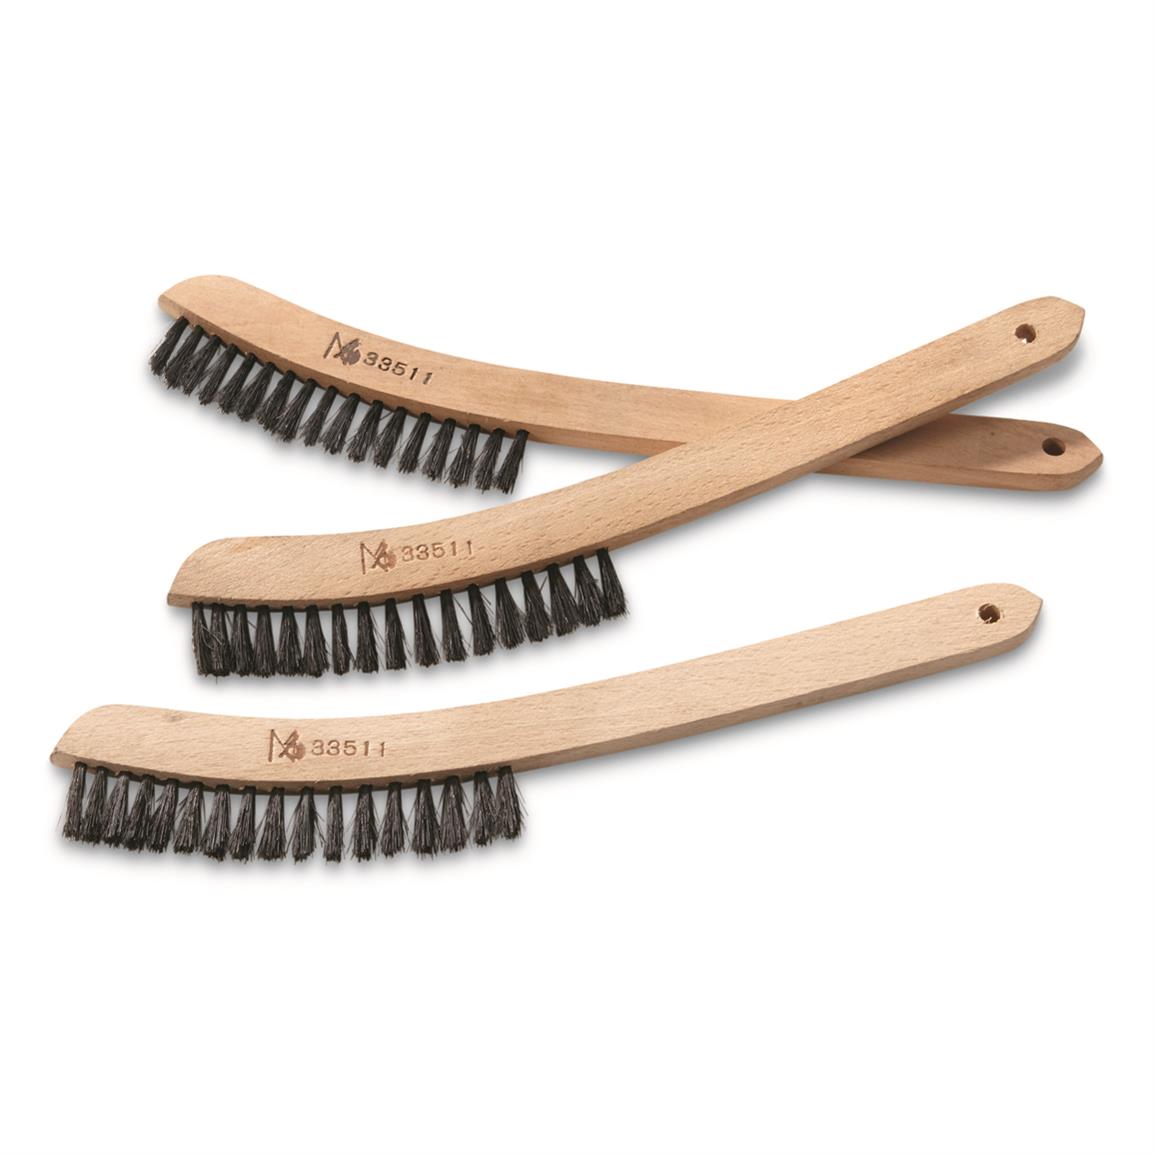 Swedish Military Surplus Curved Cleaning Brushes, 3 Pack, New